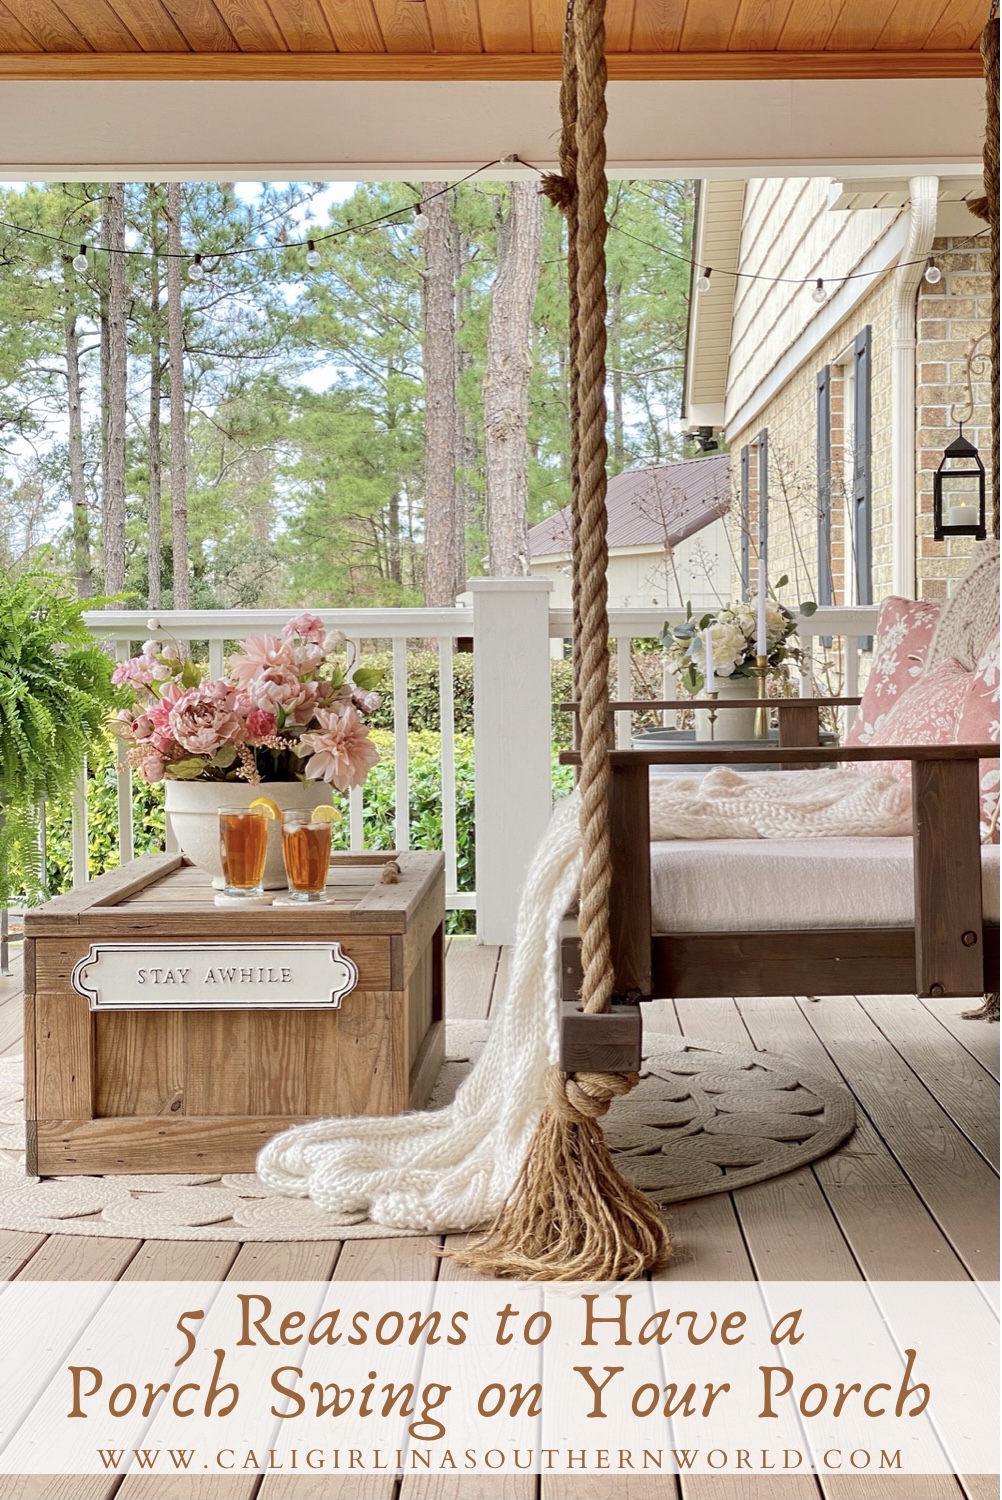 Pinterest Pin for 5 reasons to have a porch swing on your porch.